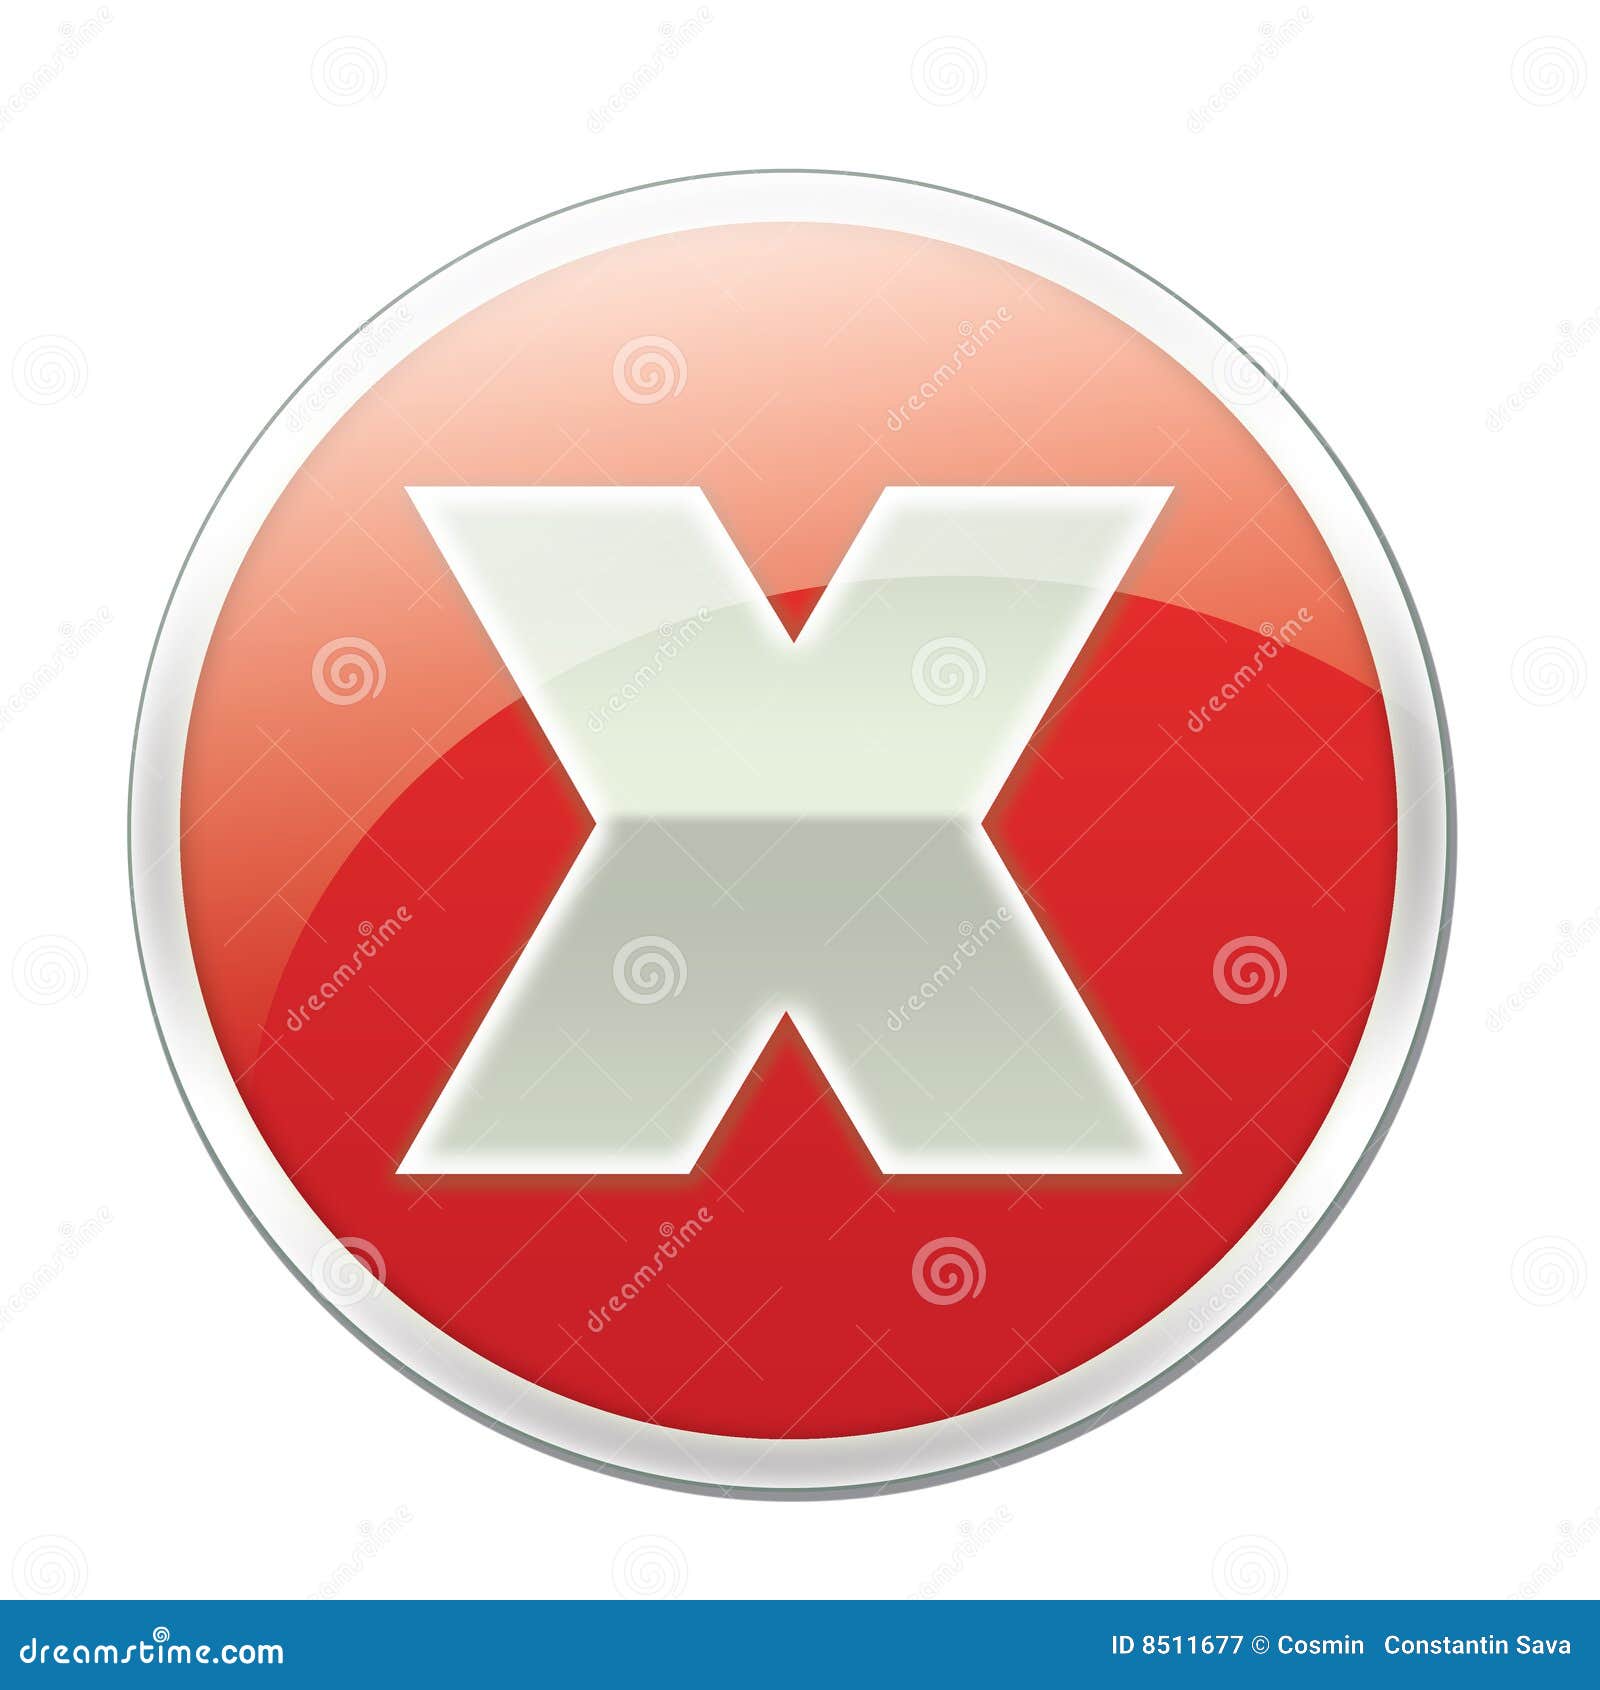 Check Mark And Cross Approved Icon Reject Symbol Stock Illustration -  Download Image Now - iStock